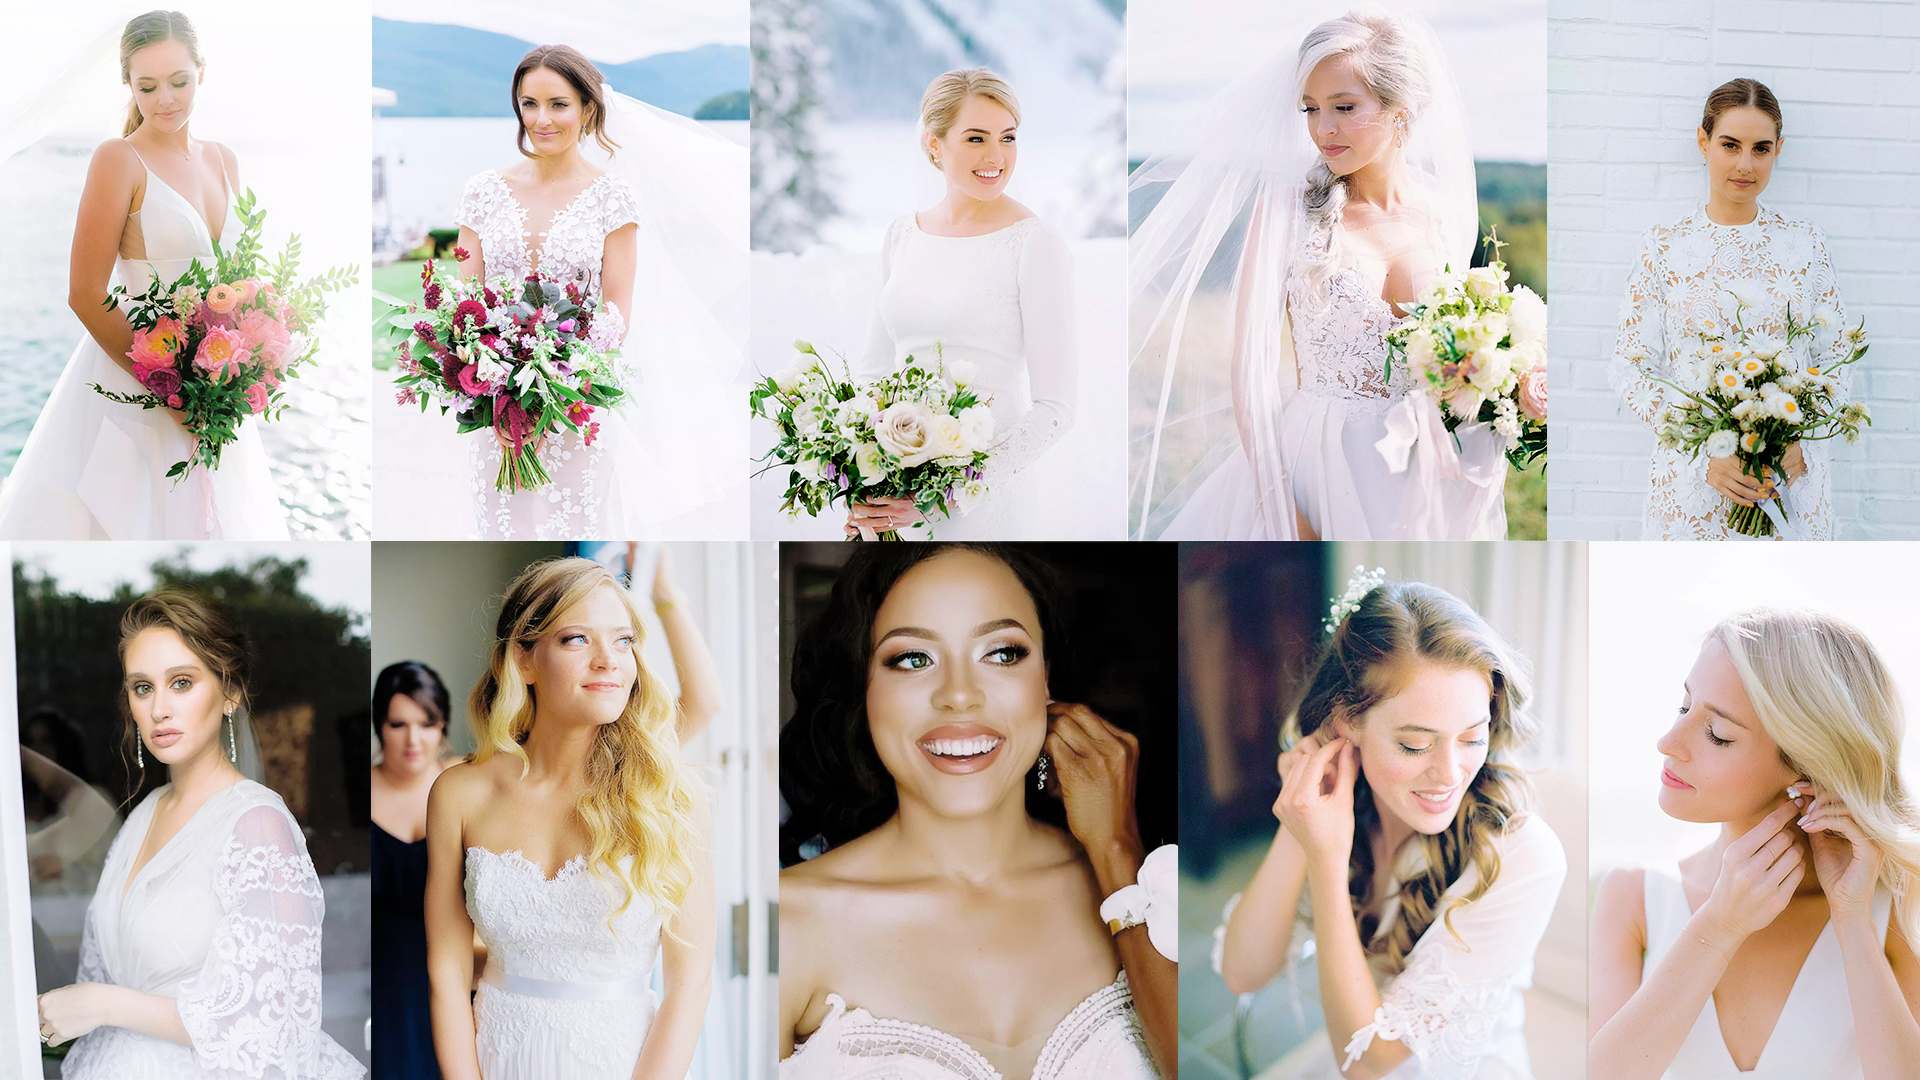 67 Elegant Bridal Makeup Ideas To Look Gorgeous And Beautiful As A Bride